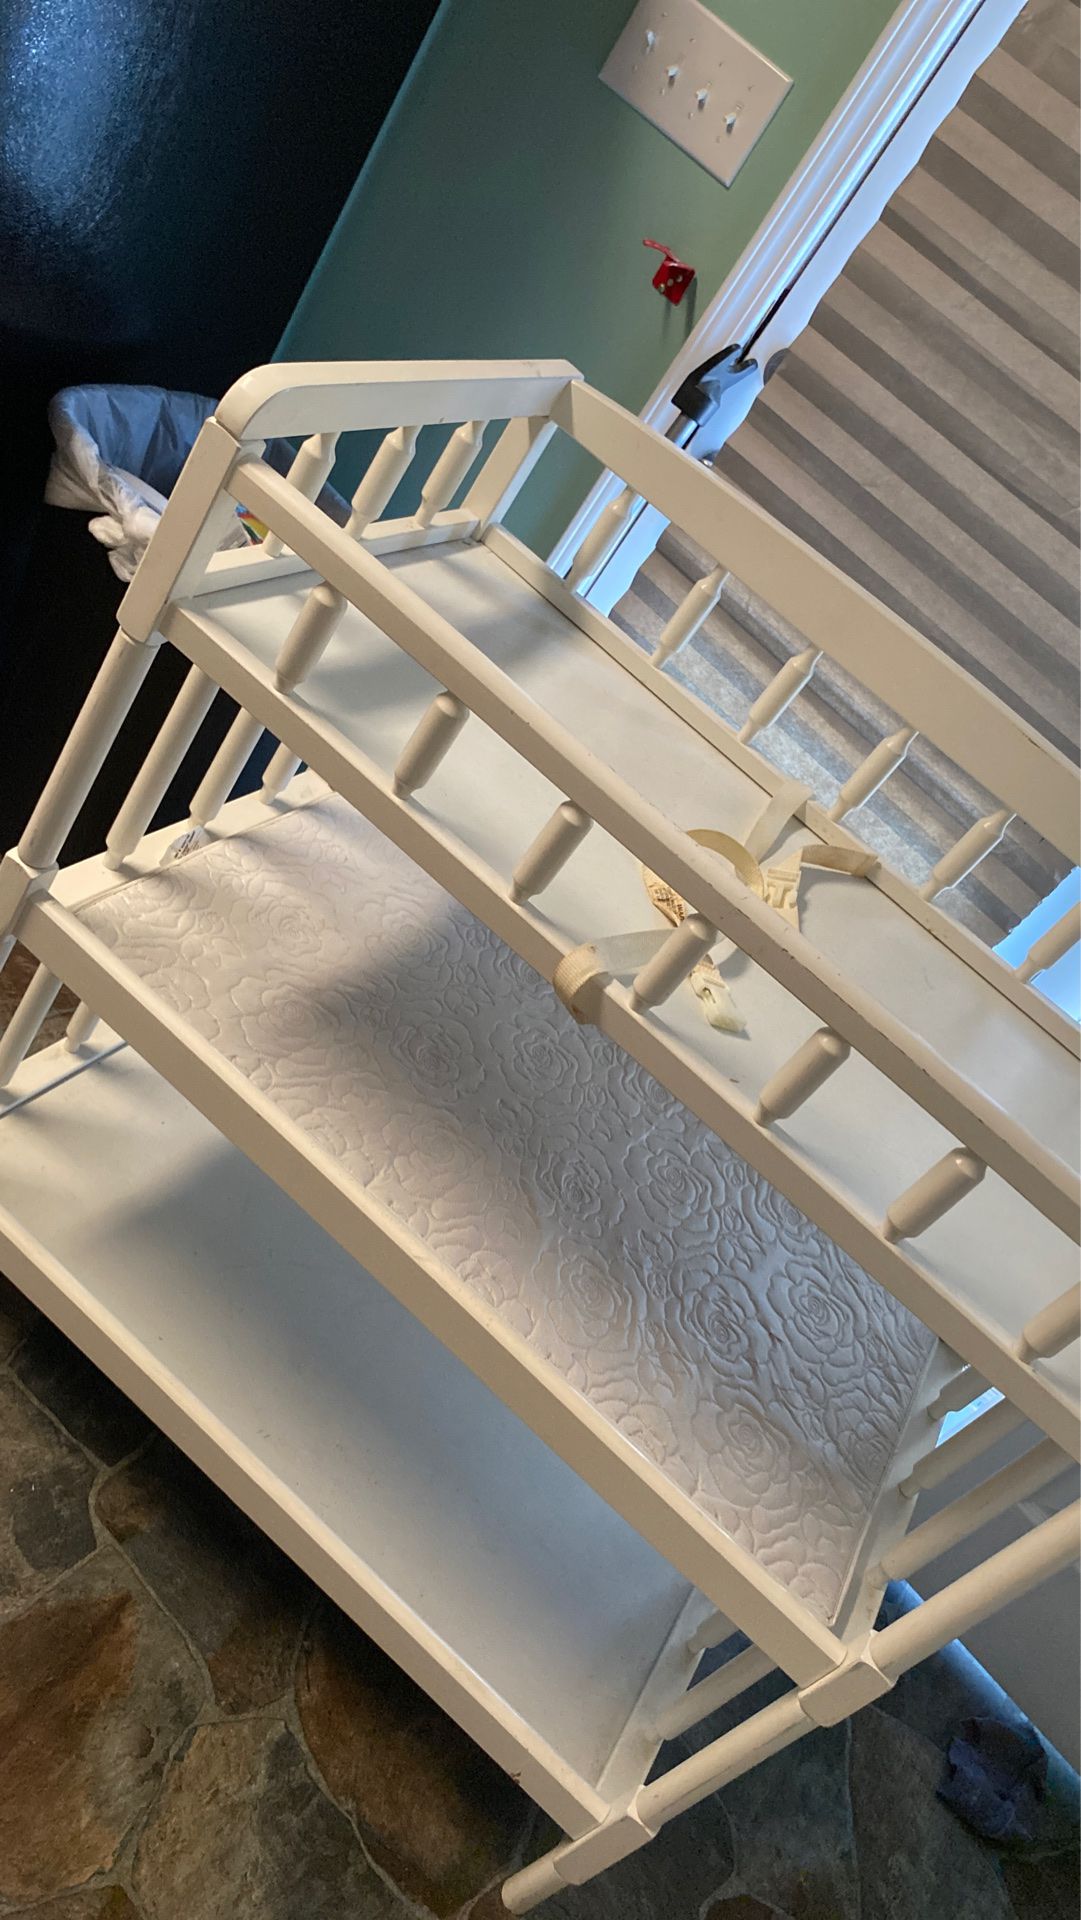 Baby changing table